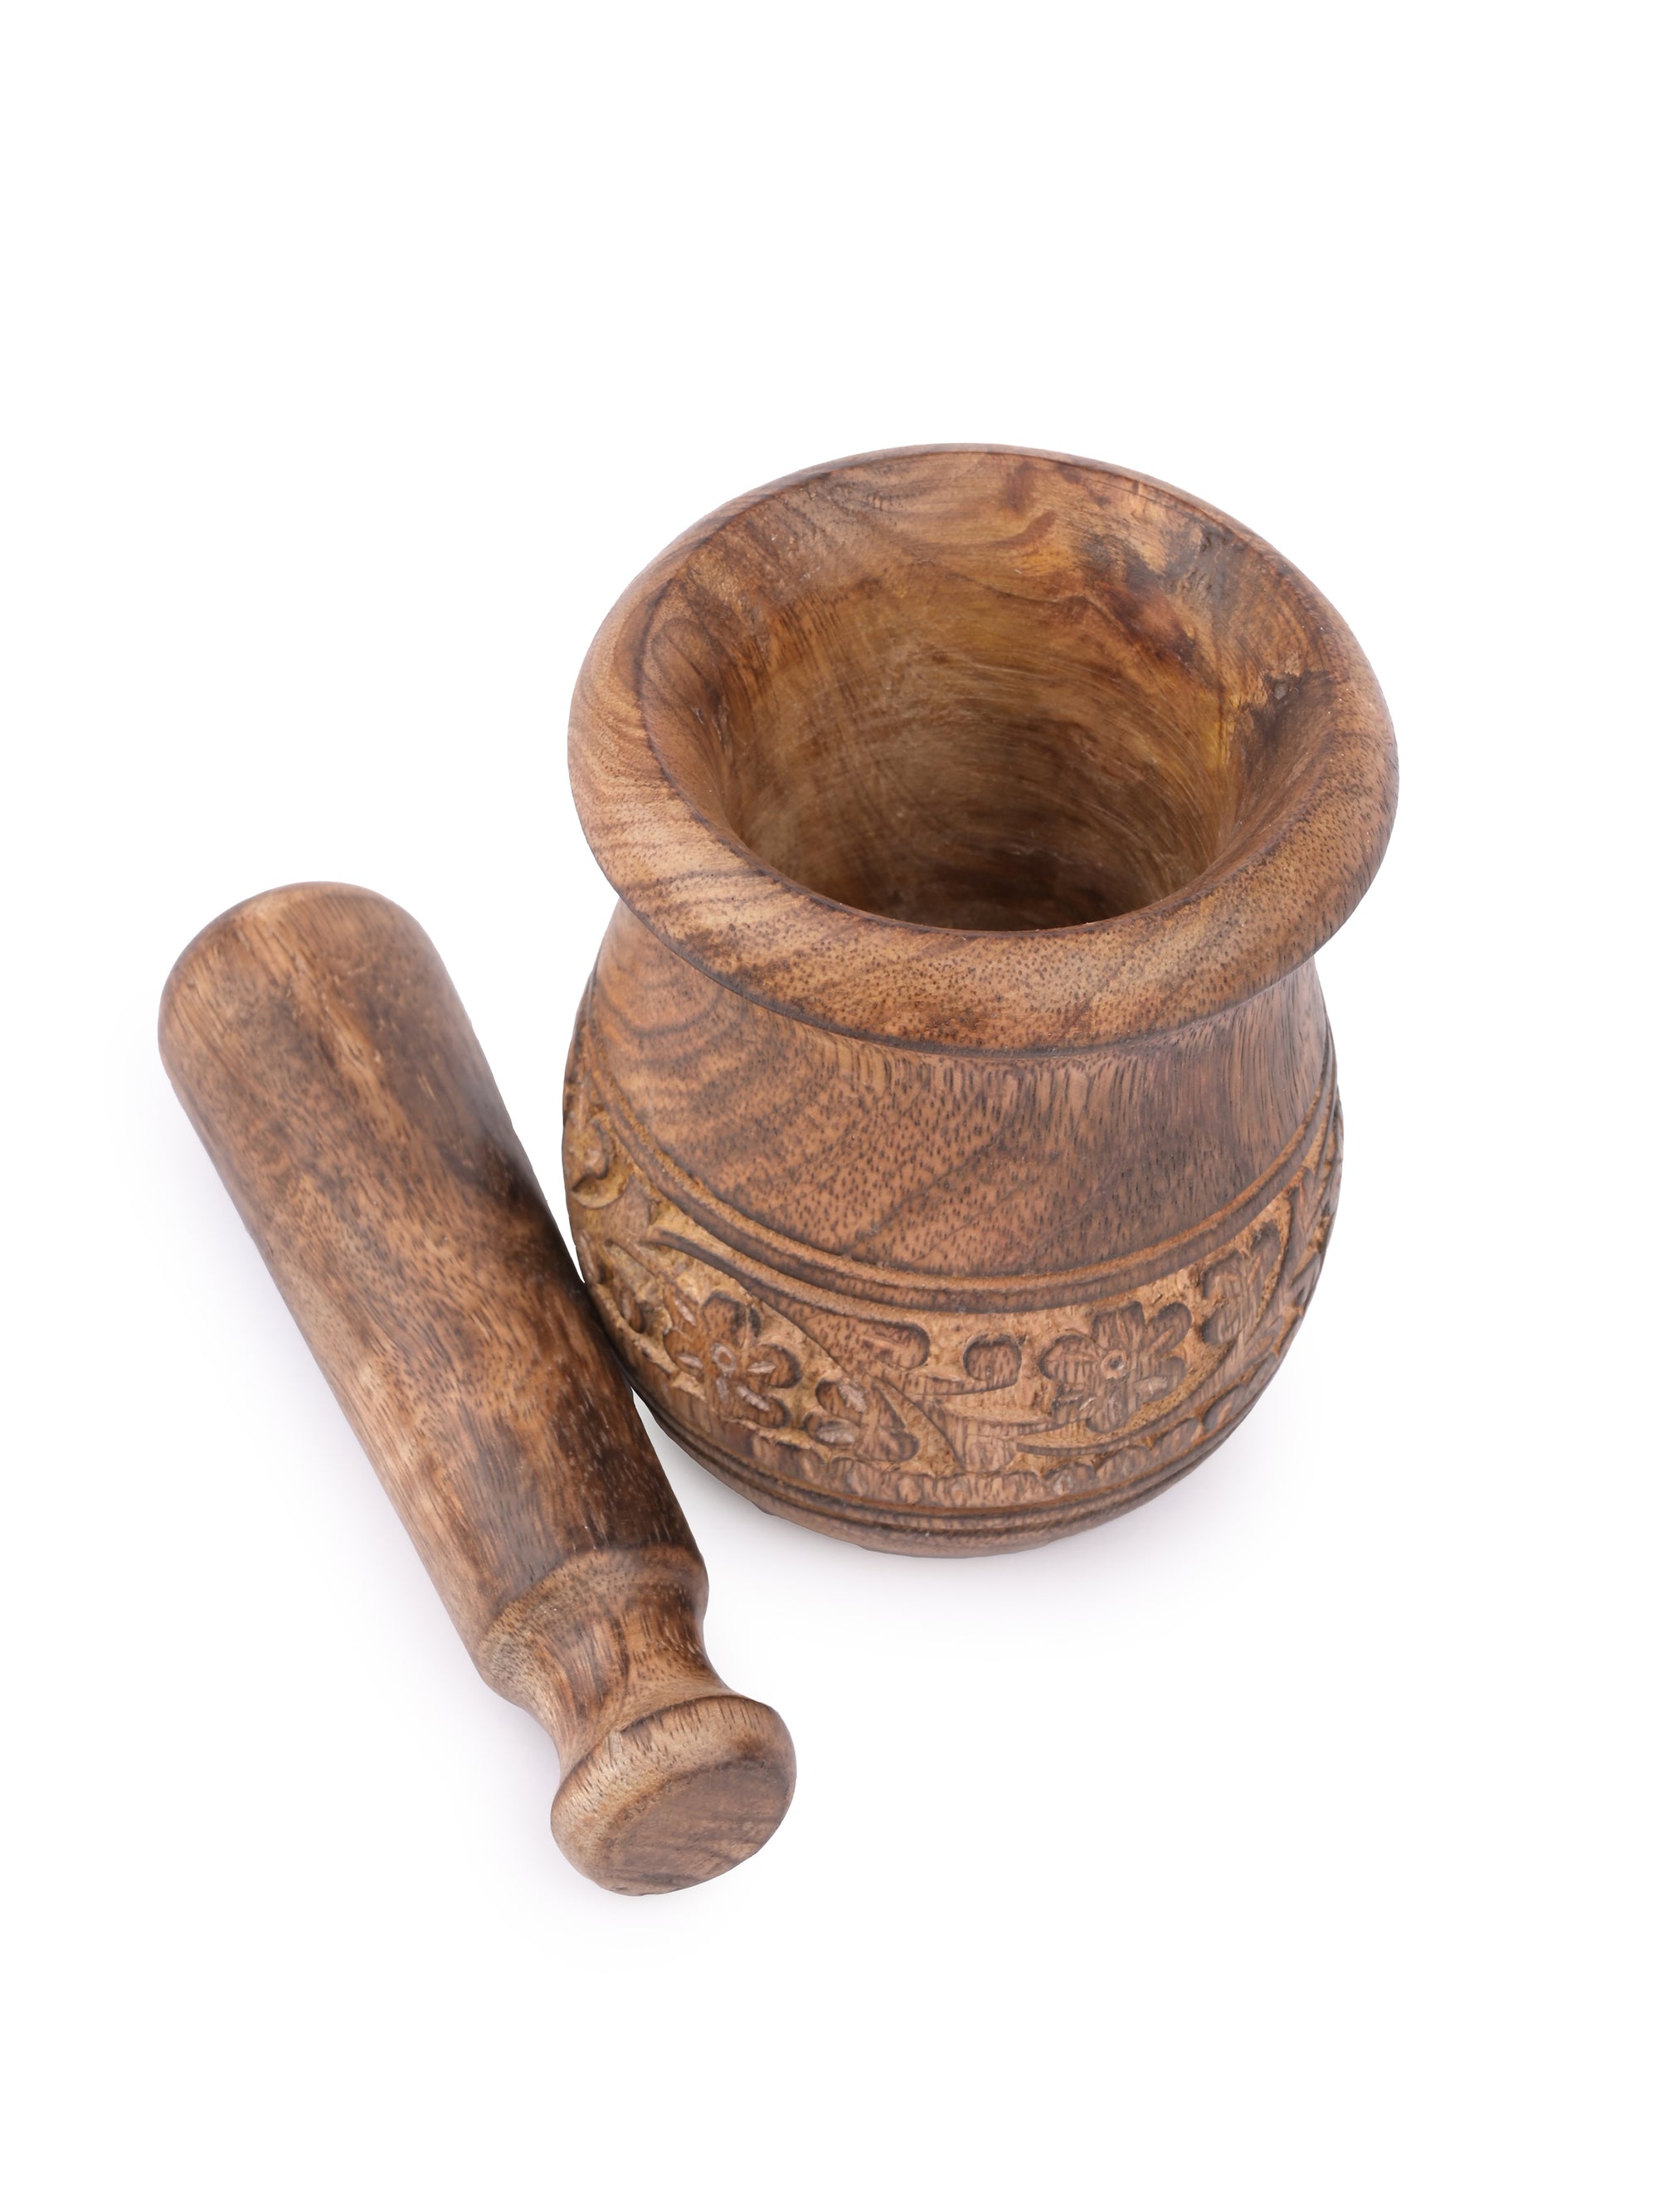 Mango Wood carved Mortar and Pestle / Okhli and Musal set - The Heritage Artifacts